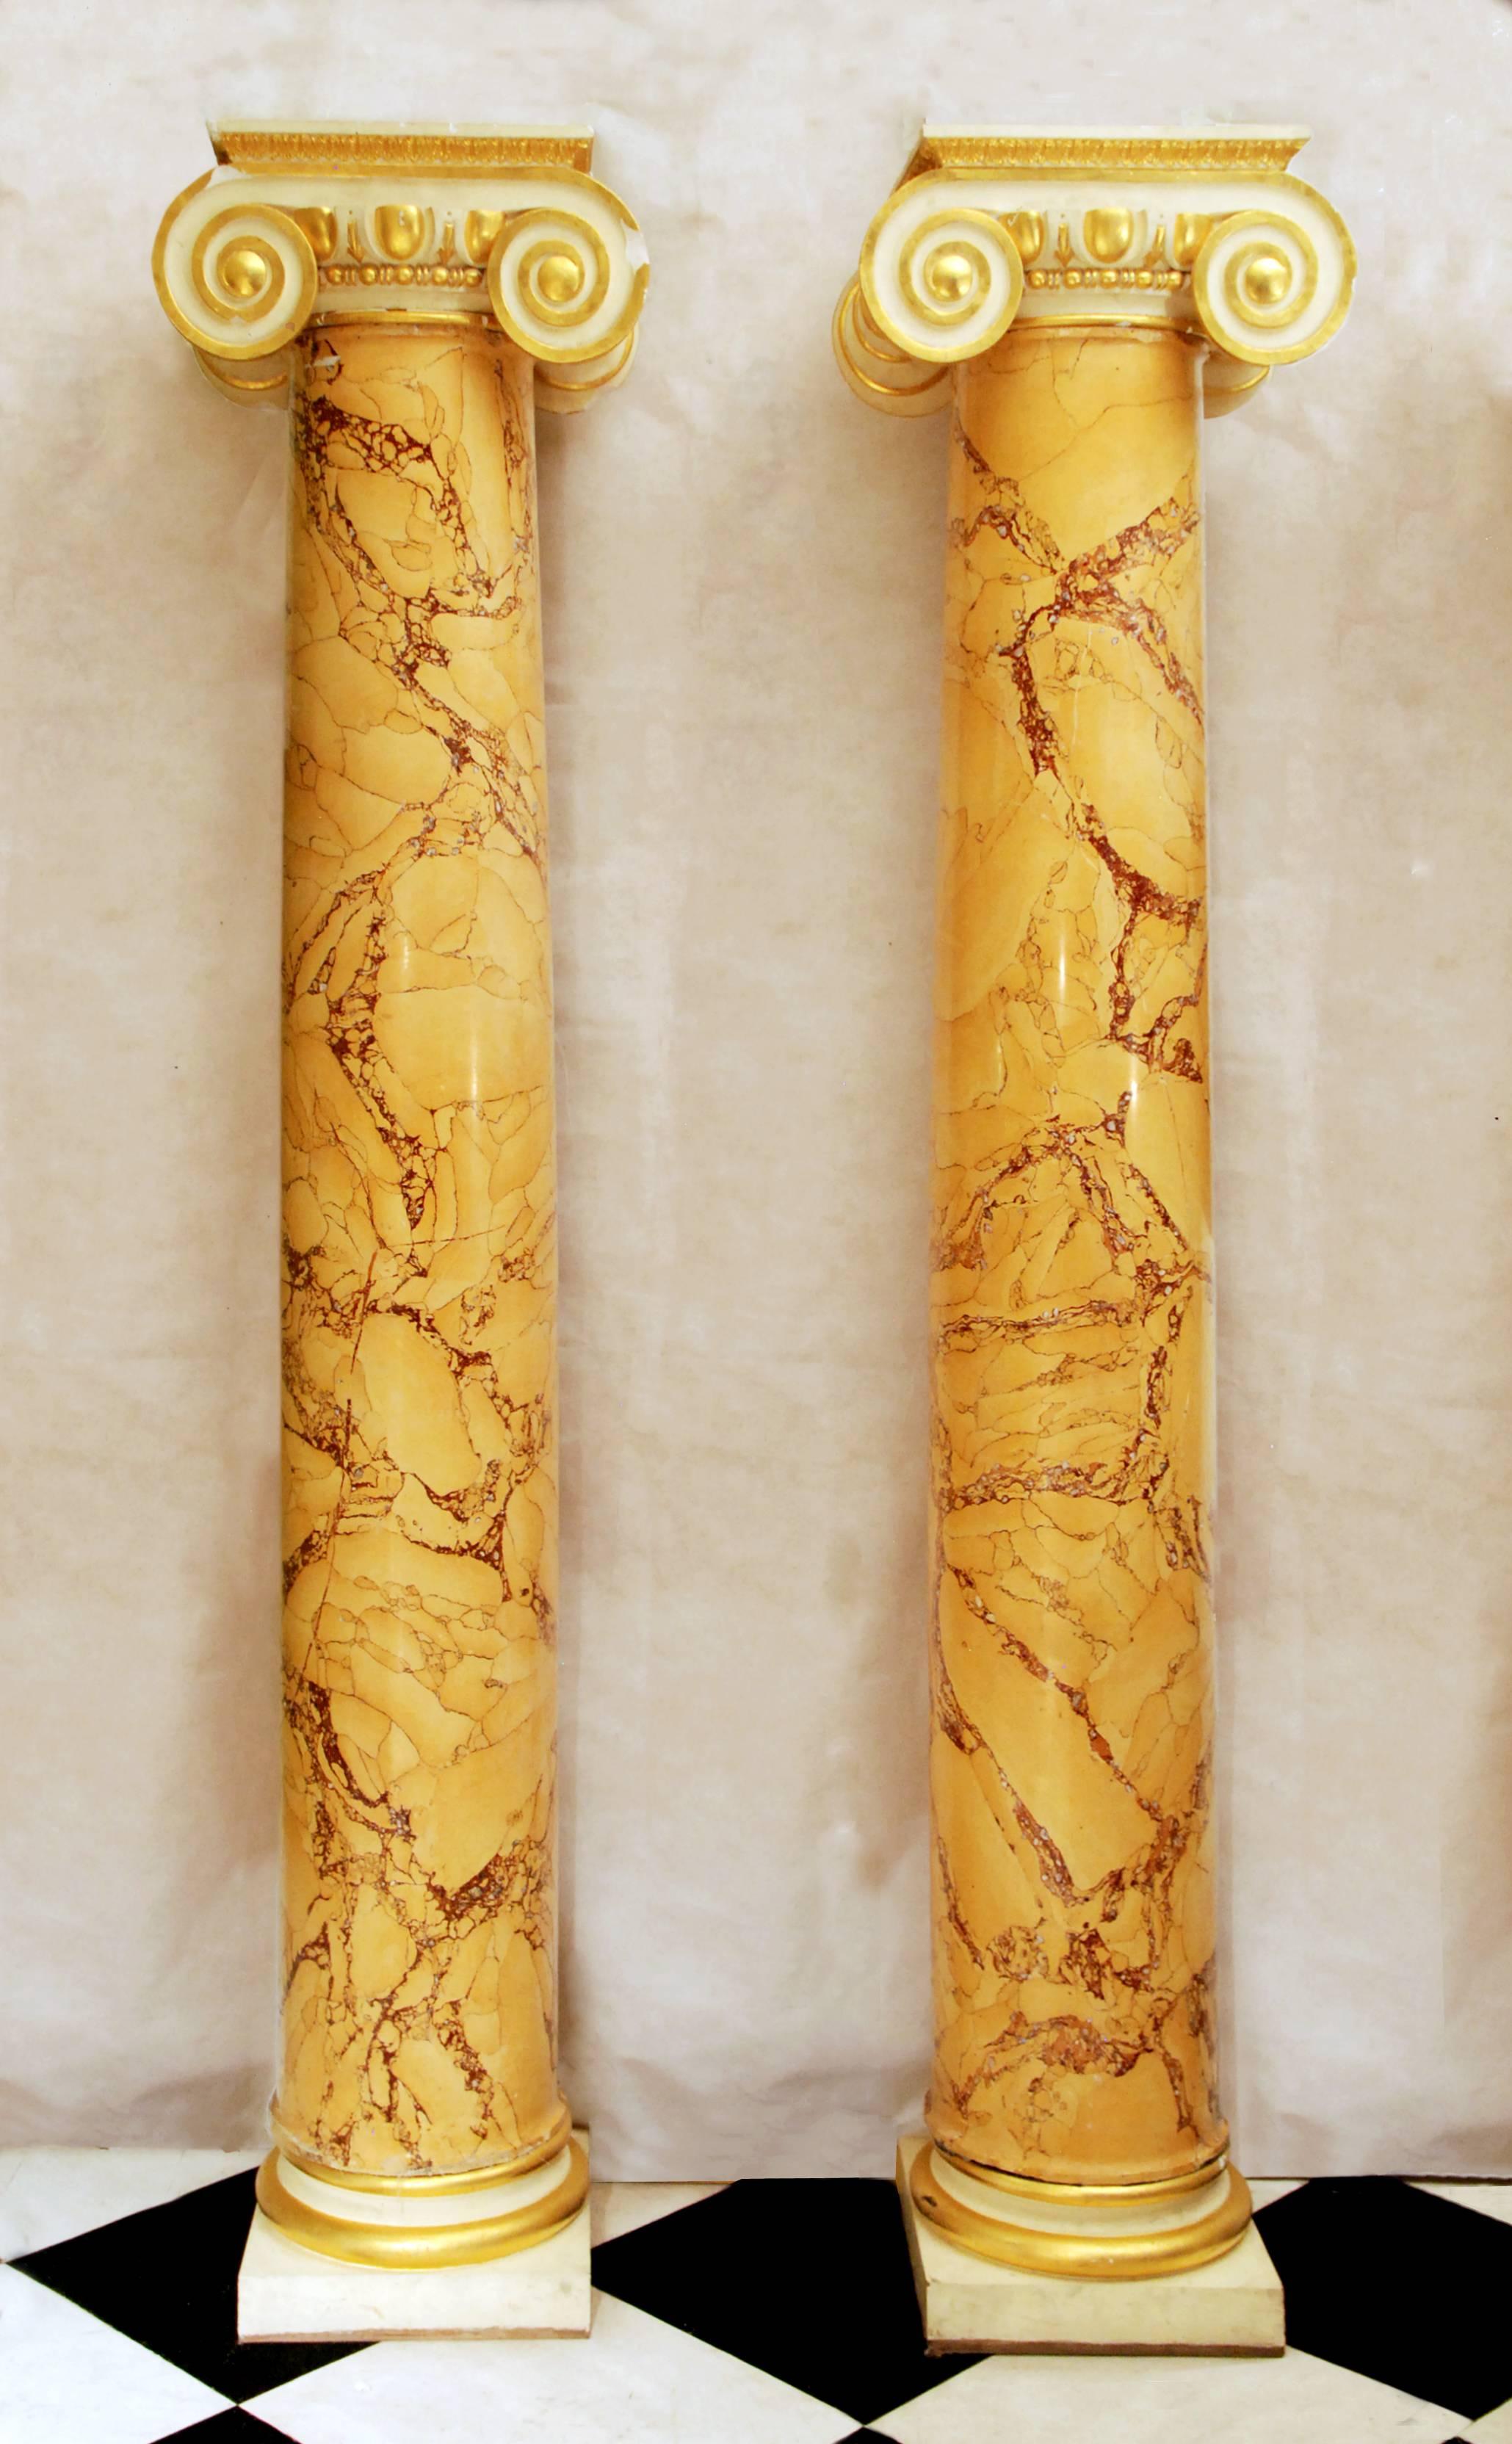 Two pairs of Sienna scagliola columns. Roman and Greek Ionic order with gilt embellishments, removed from the former residence of Prince Jefri of Brunei, previously the Playboy Club, 45 Park Lane.

Dimensions: 235cm (92½